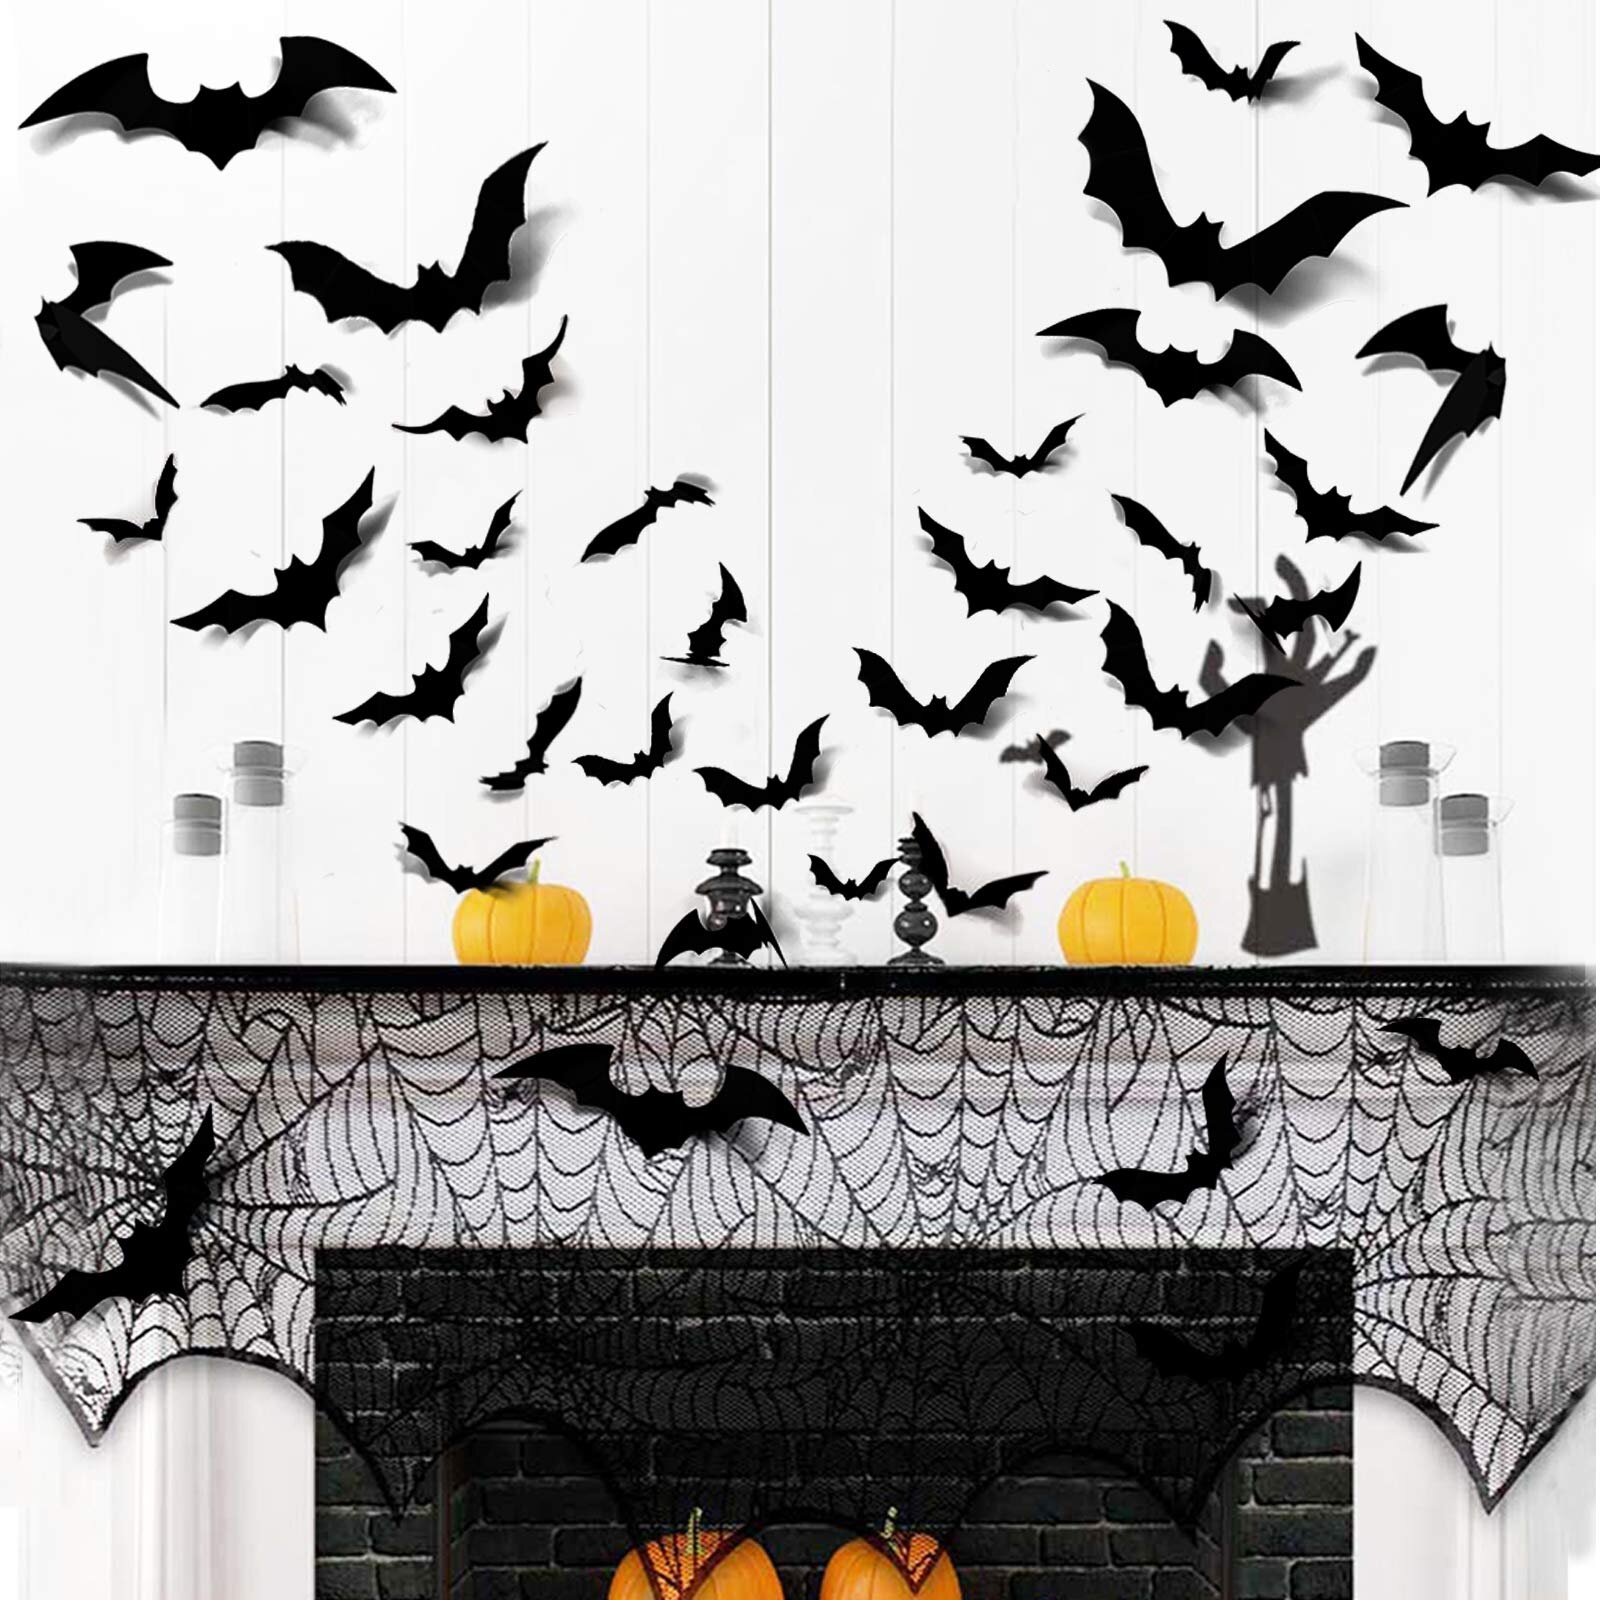 ENXIANGXIJ 60PCS Halloween 3D Bats Decoration 2021 Upgraded 4 Different Sizes Realistic PVC Scary Black Bat Sticker for Home Decor DIY Wall Decal Bathroom Indoor Hallowmas Party Supplies 